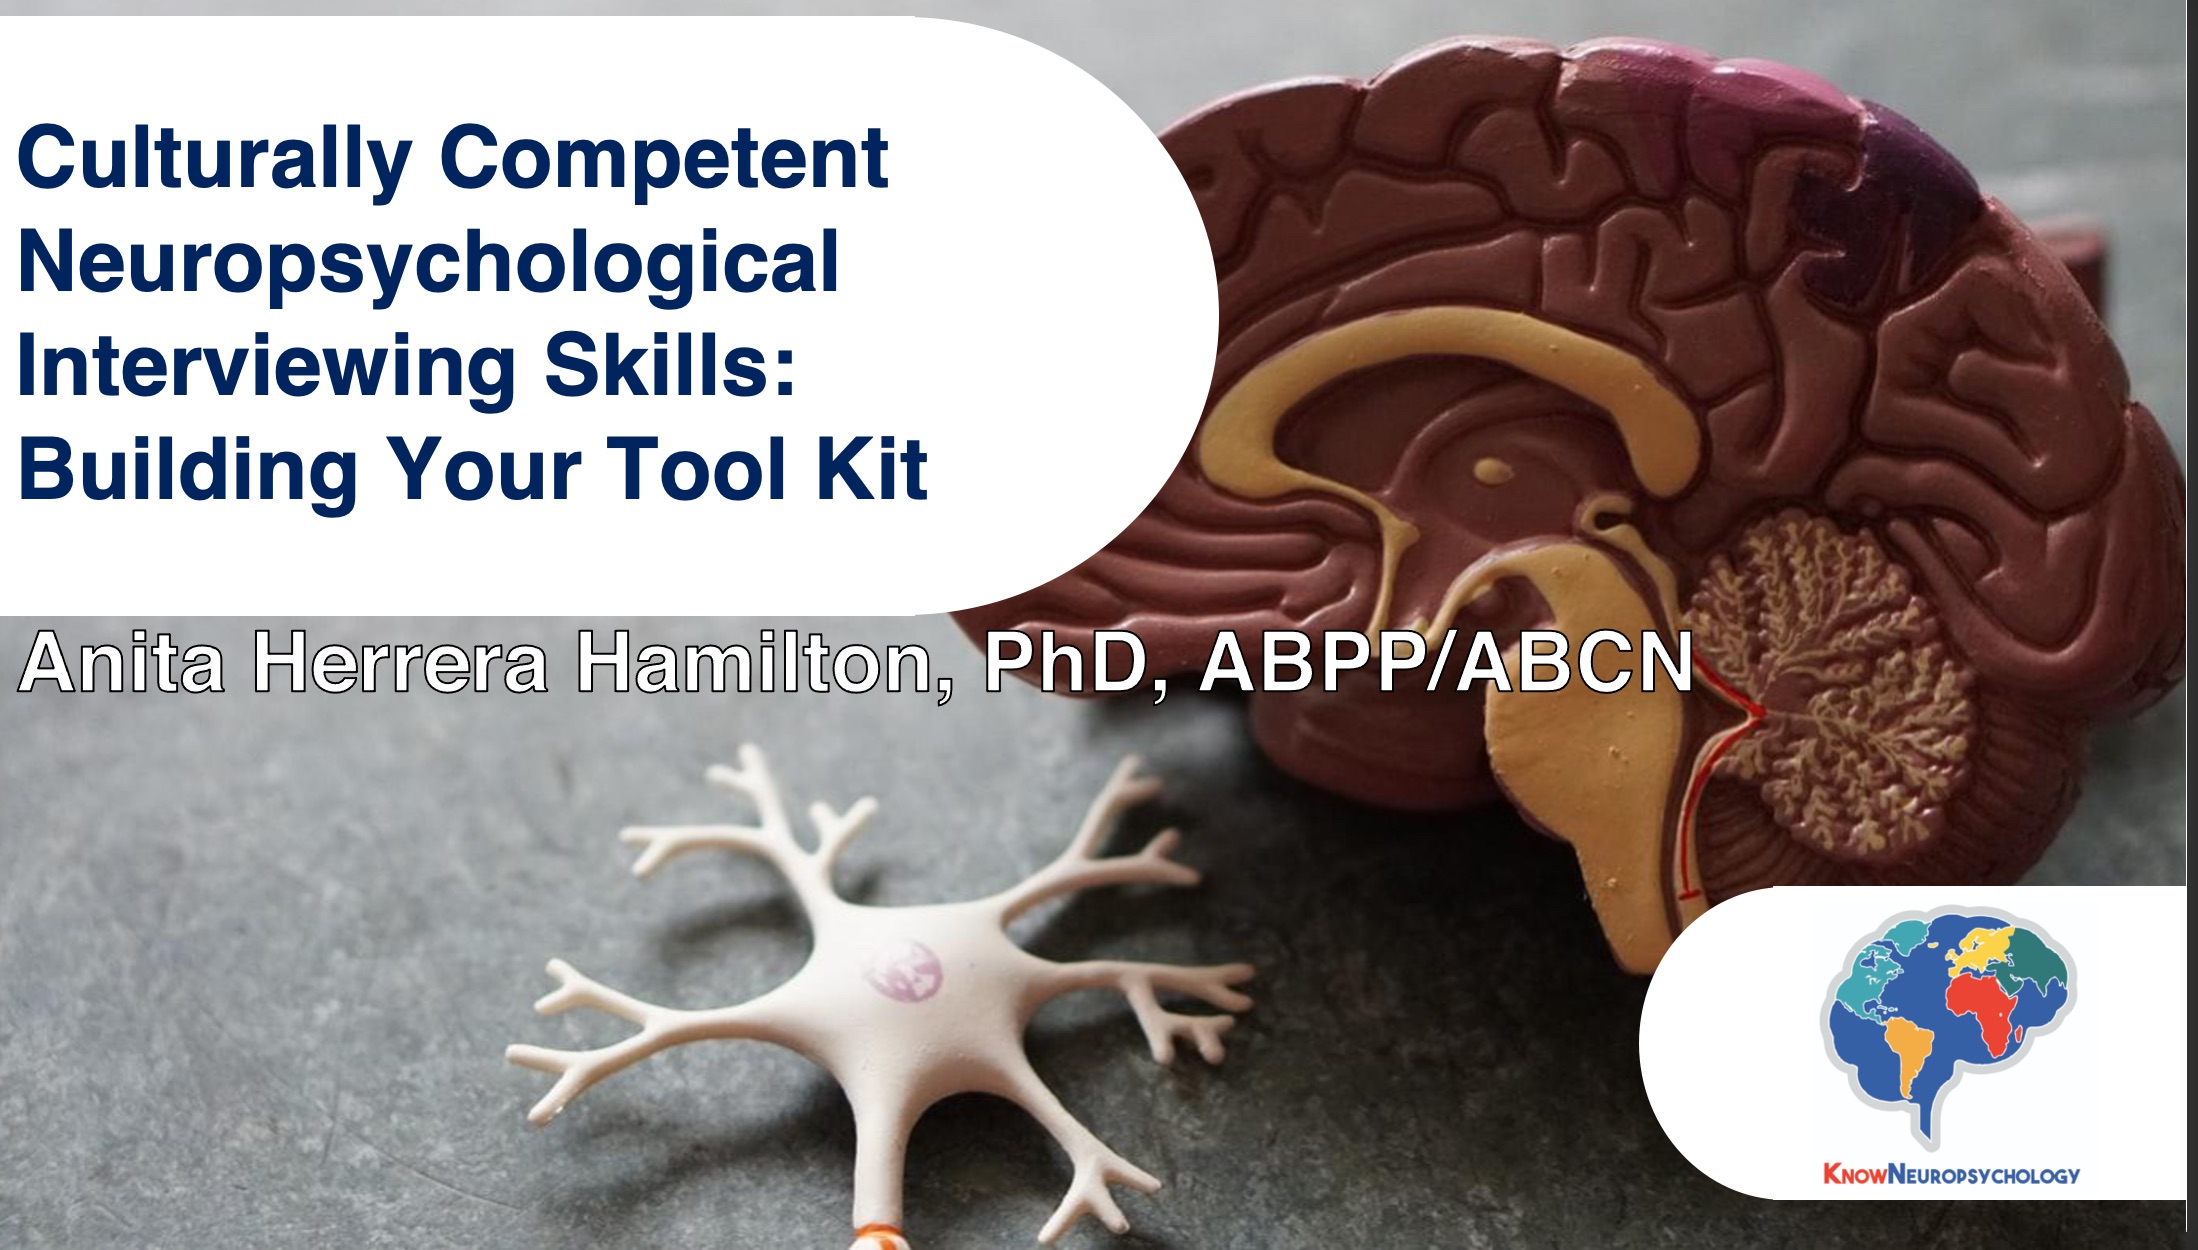 Culturally Competent Neuropsychological Interviewing Skills: Building Your Toolkit with Dr. Anita Herrera Hamilton